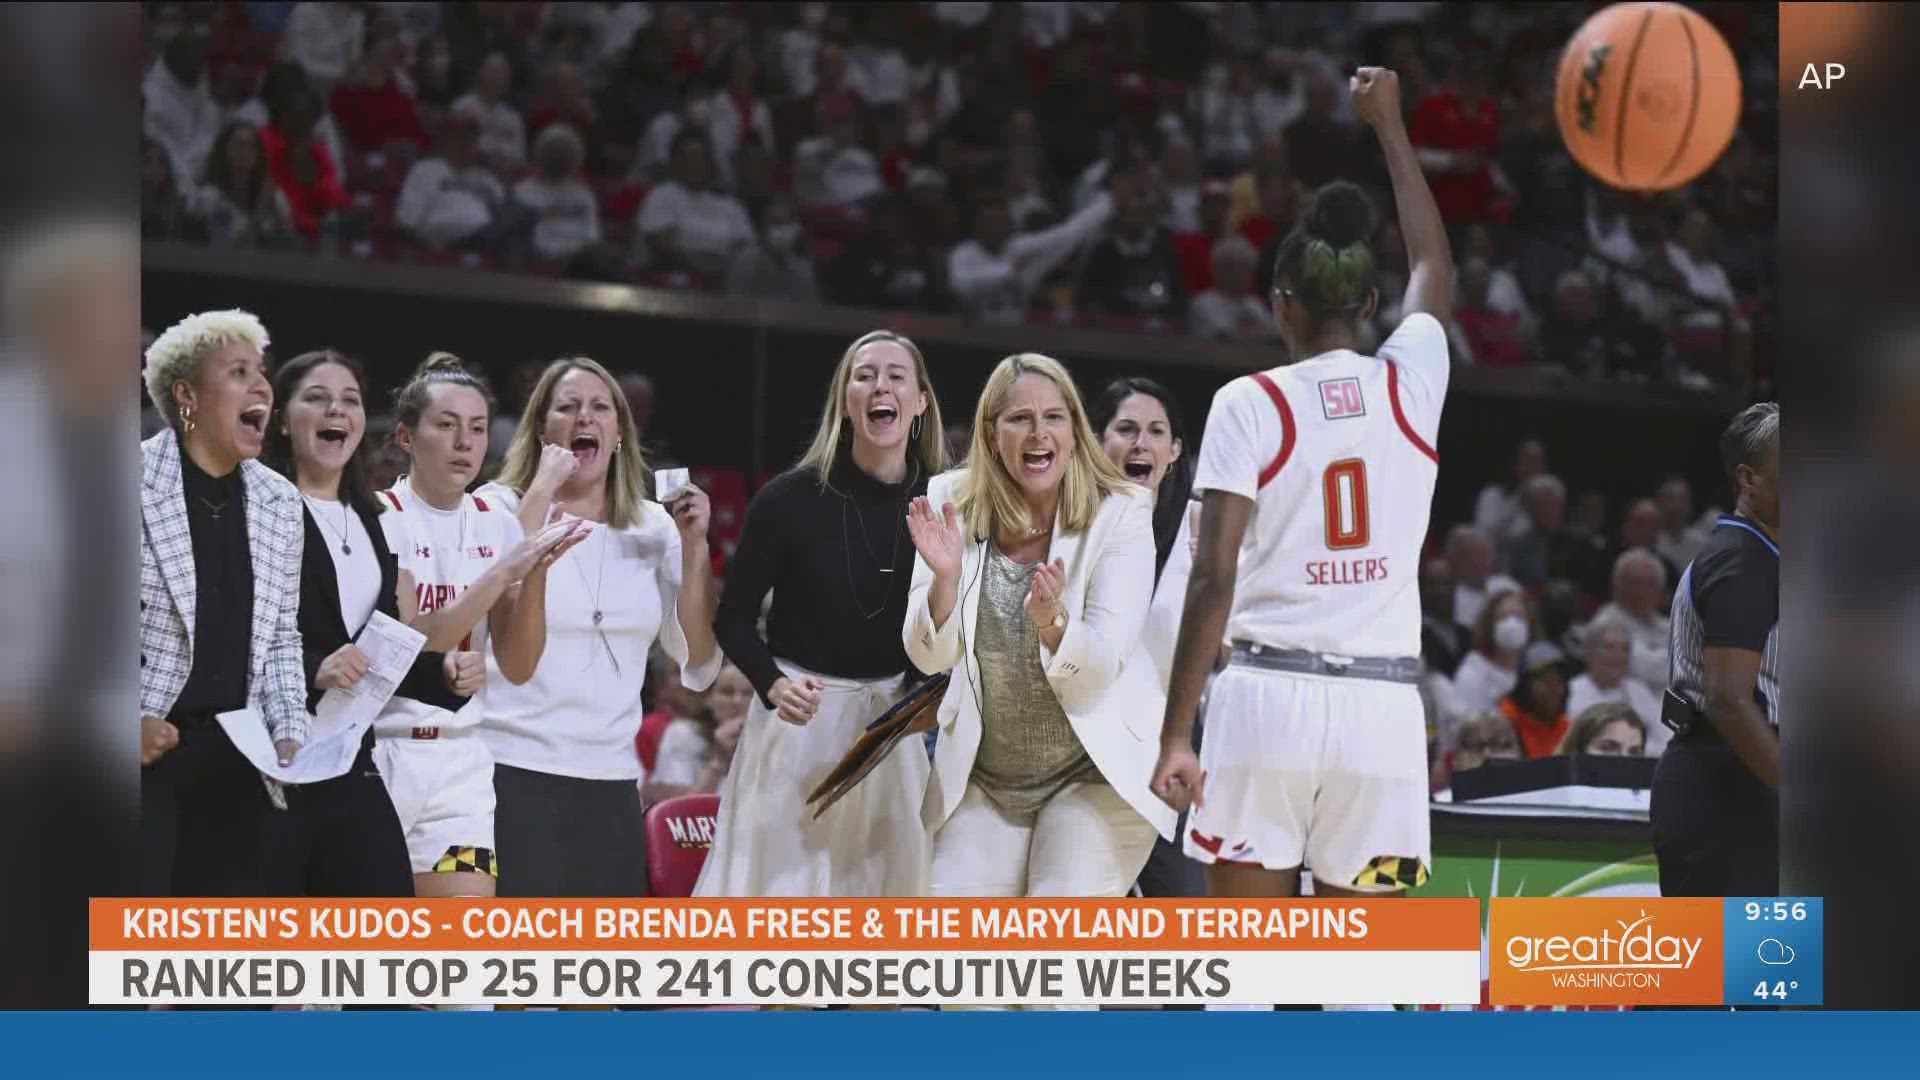 Kristen gives KUDOS to Coach Brenda Frese & the Lady Terrapins basketball team of the University of Maryland for being ranked in the AP top 25 for 241 straight weeks